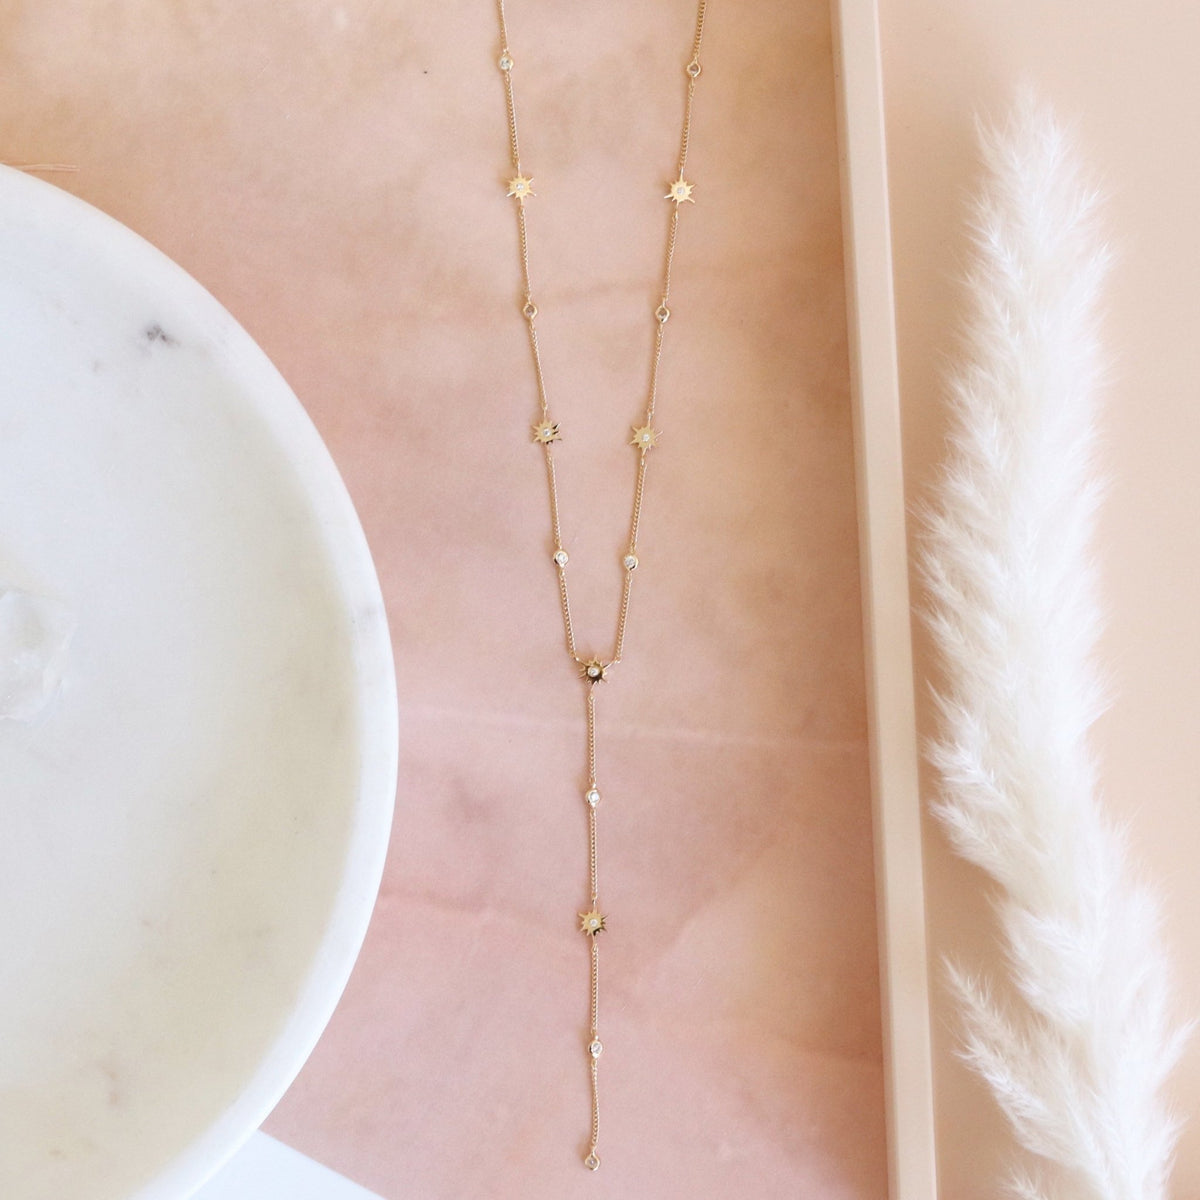 TINY BELIEVE Y NECKLACE - CUBIC ZIRCONIA &amp; GOLD - SO PRETTY CARA COTTER